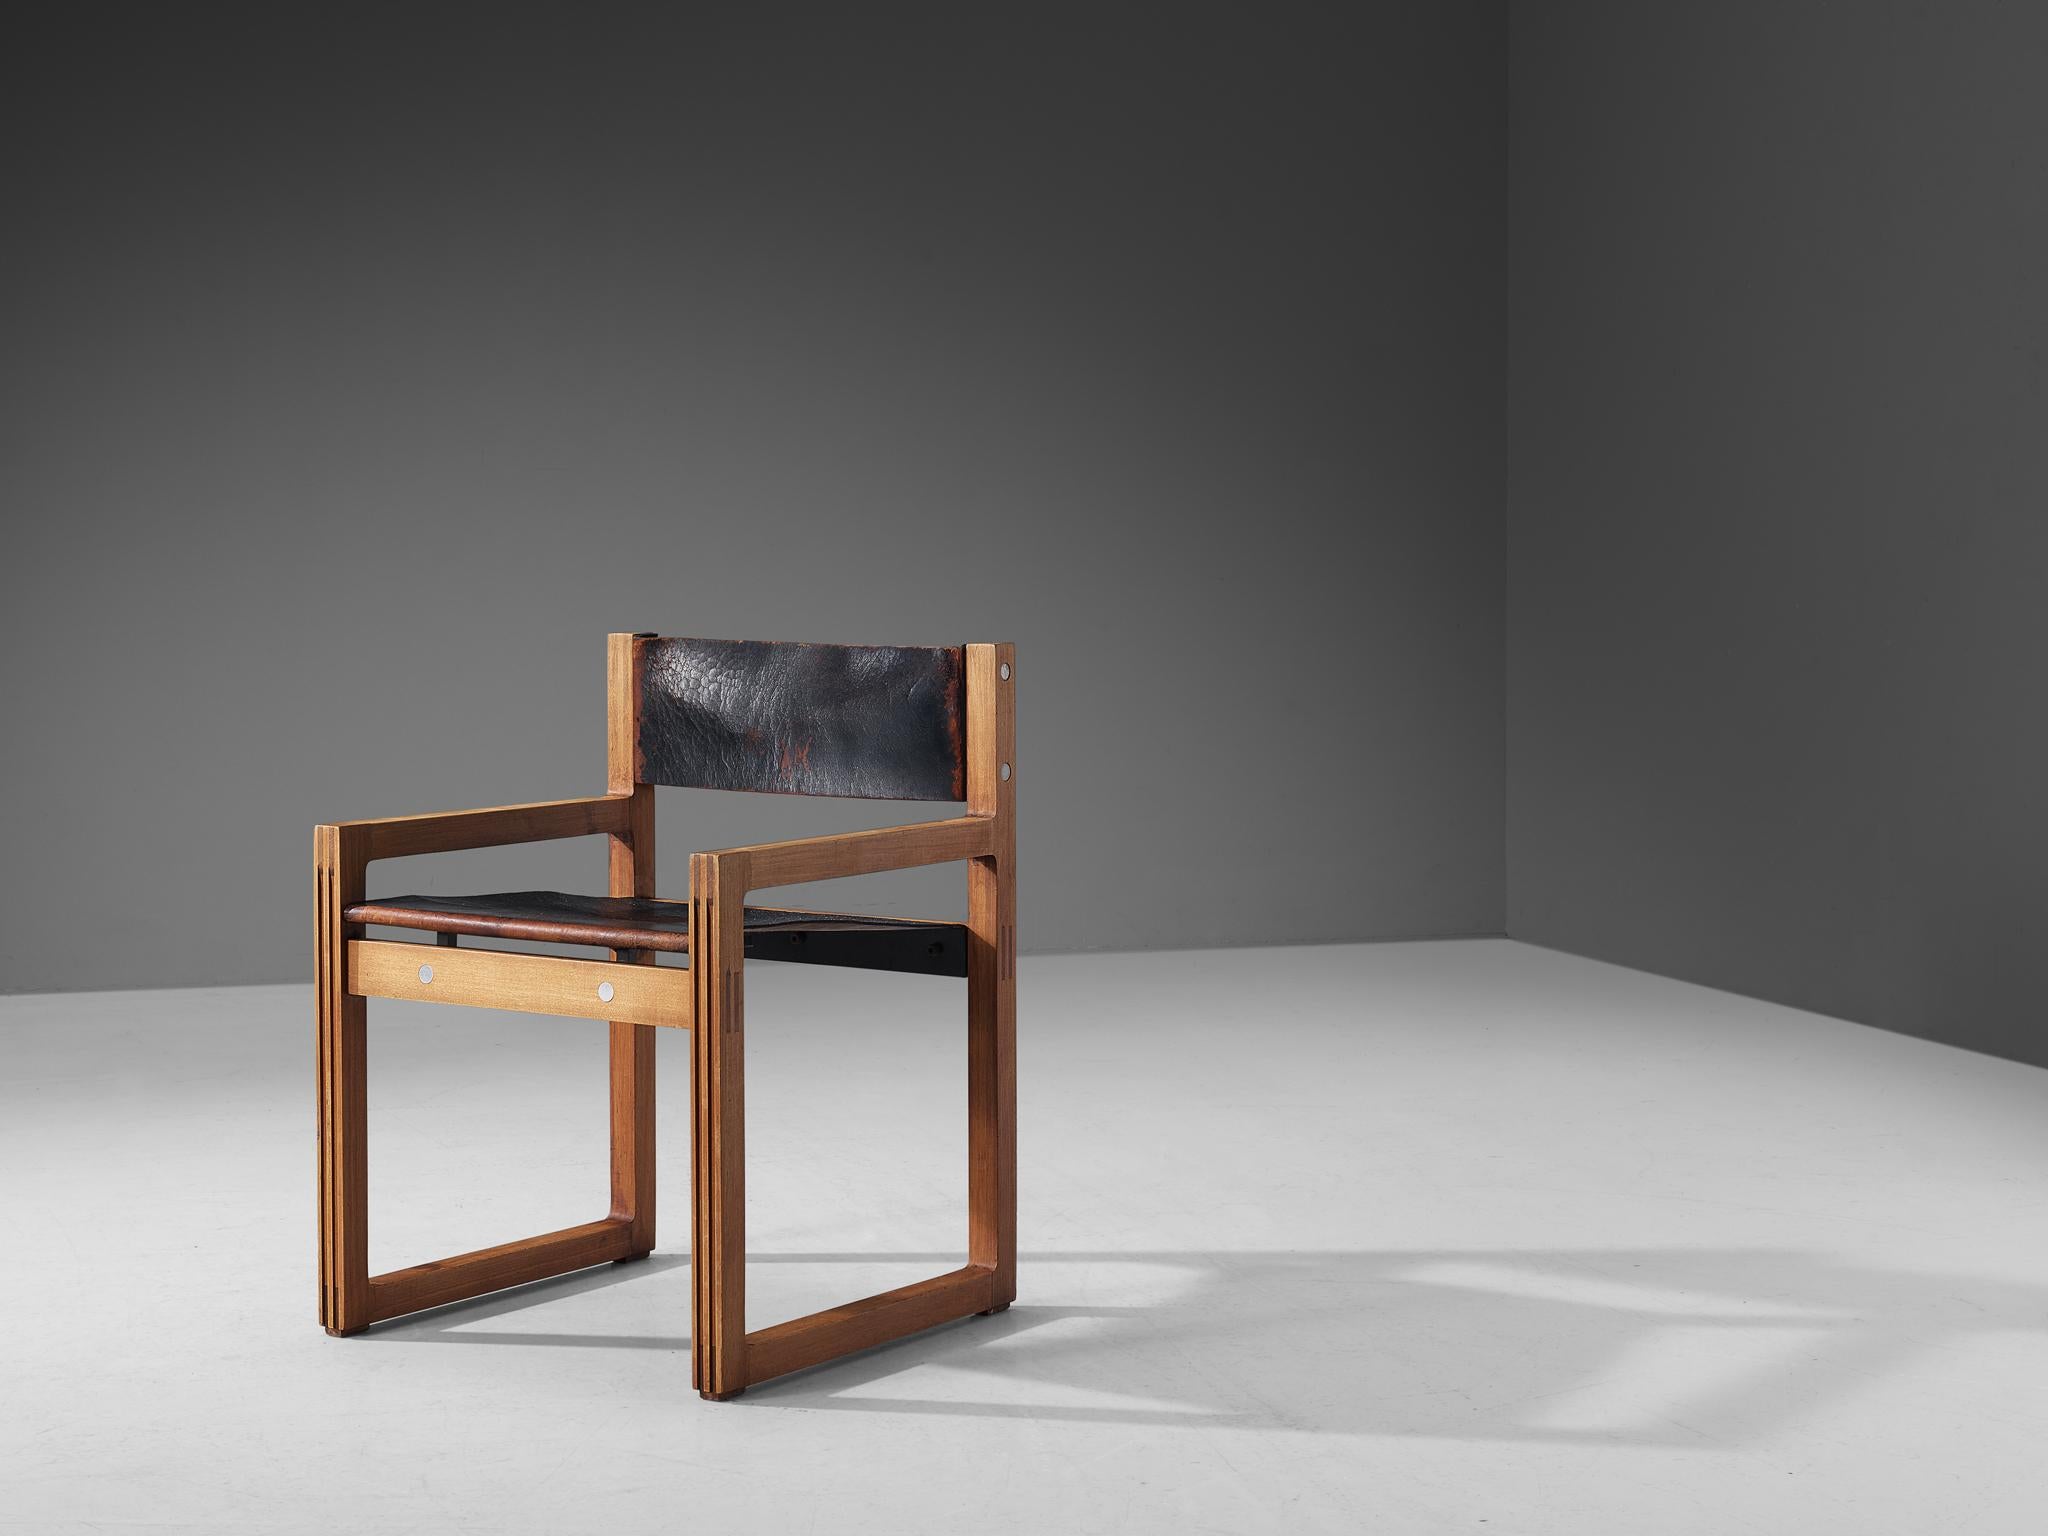 Christophe Gevers for De Coene, armchair, part of the 'Saphir' collection, teak, leather, metal, Belgium, circa 1962.

Simplistic yet elegant armchair designed by Christophe Gevers for De Coene in 1962. Straight geometrical lines are prominent in